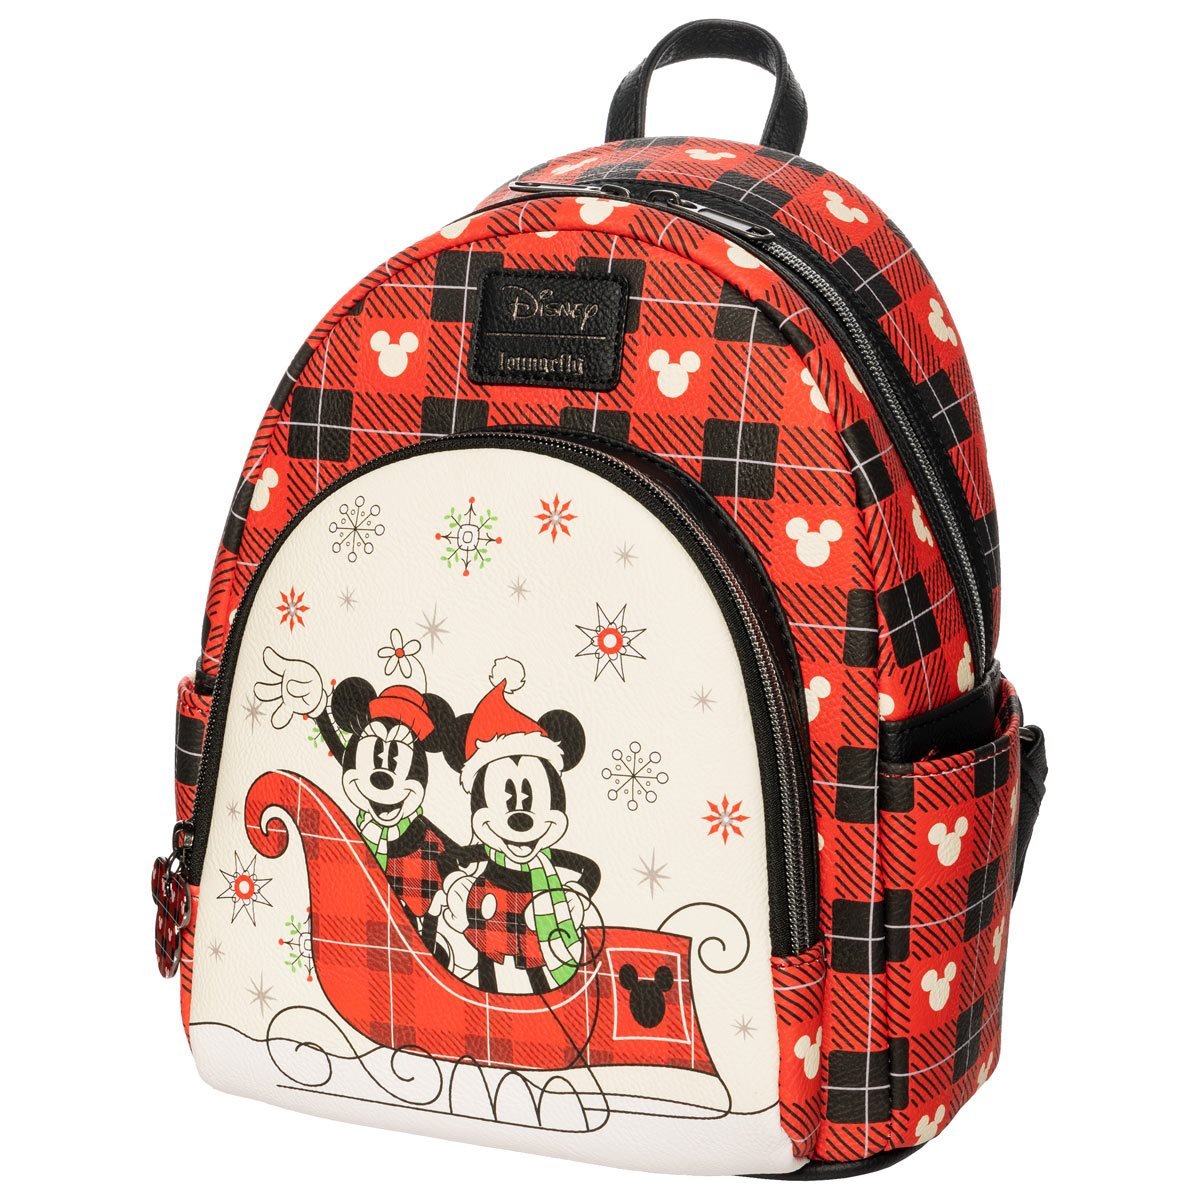 Loungefly Disney Holiday Mickey and Minnie Mouse Mini Backpack - Entertainment Earth Ex - Loungefly mini backpack side view